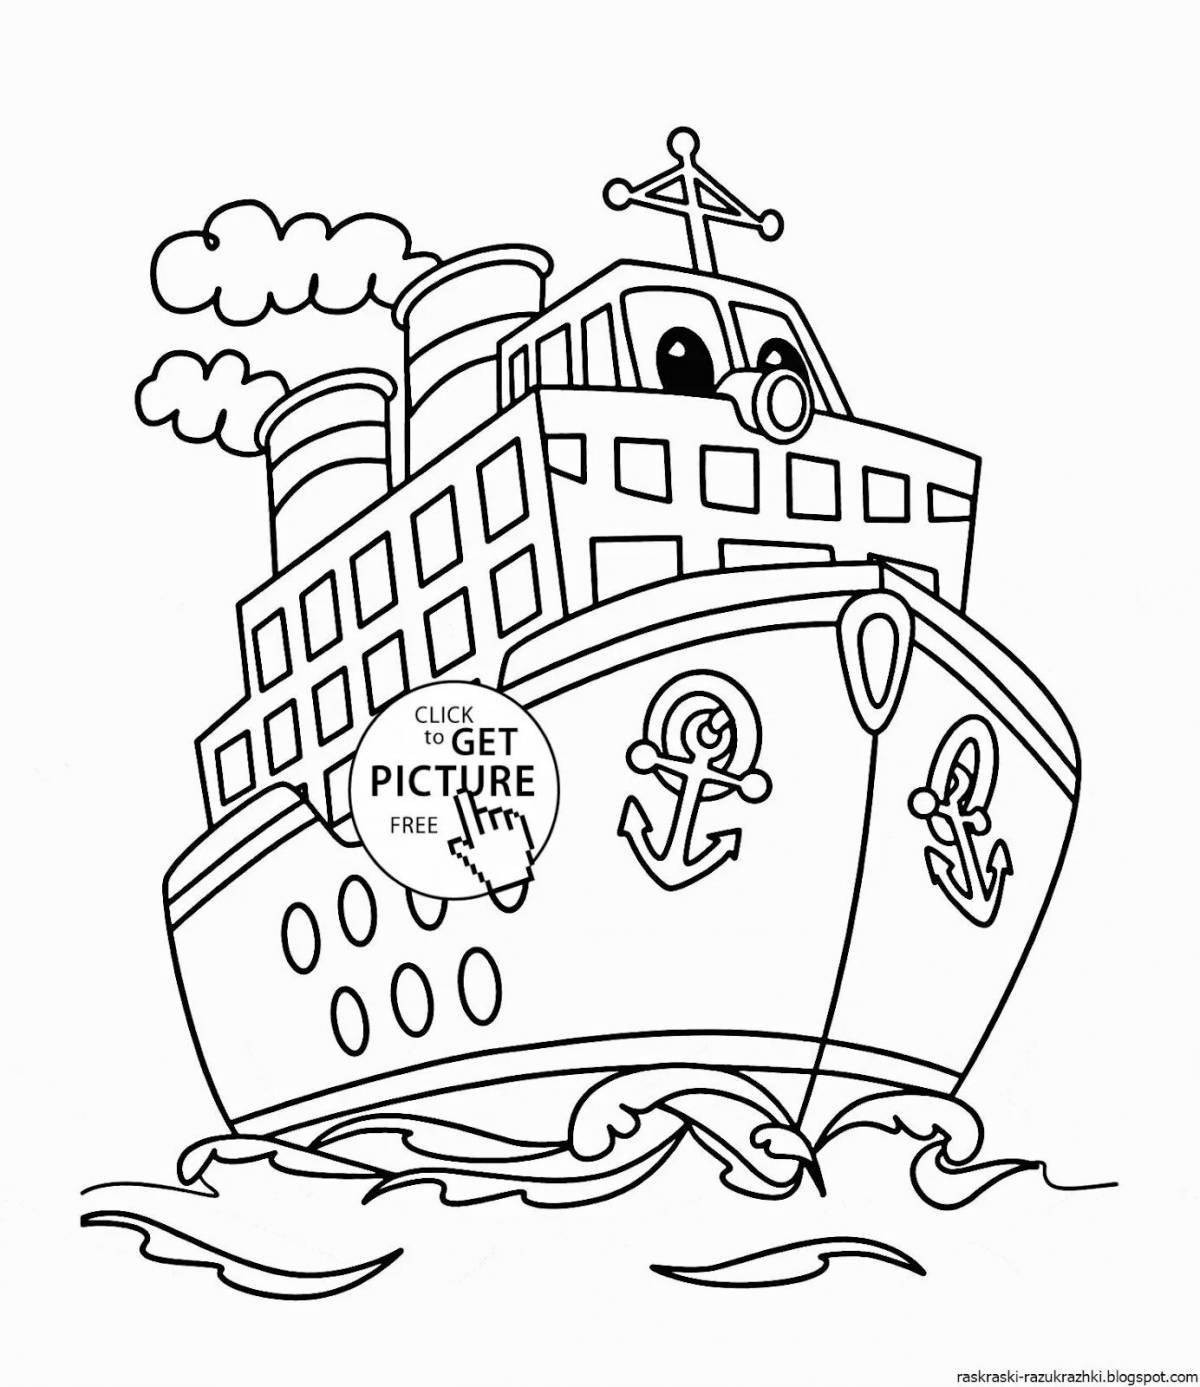 Great ship coloring book for kids